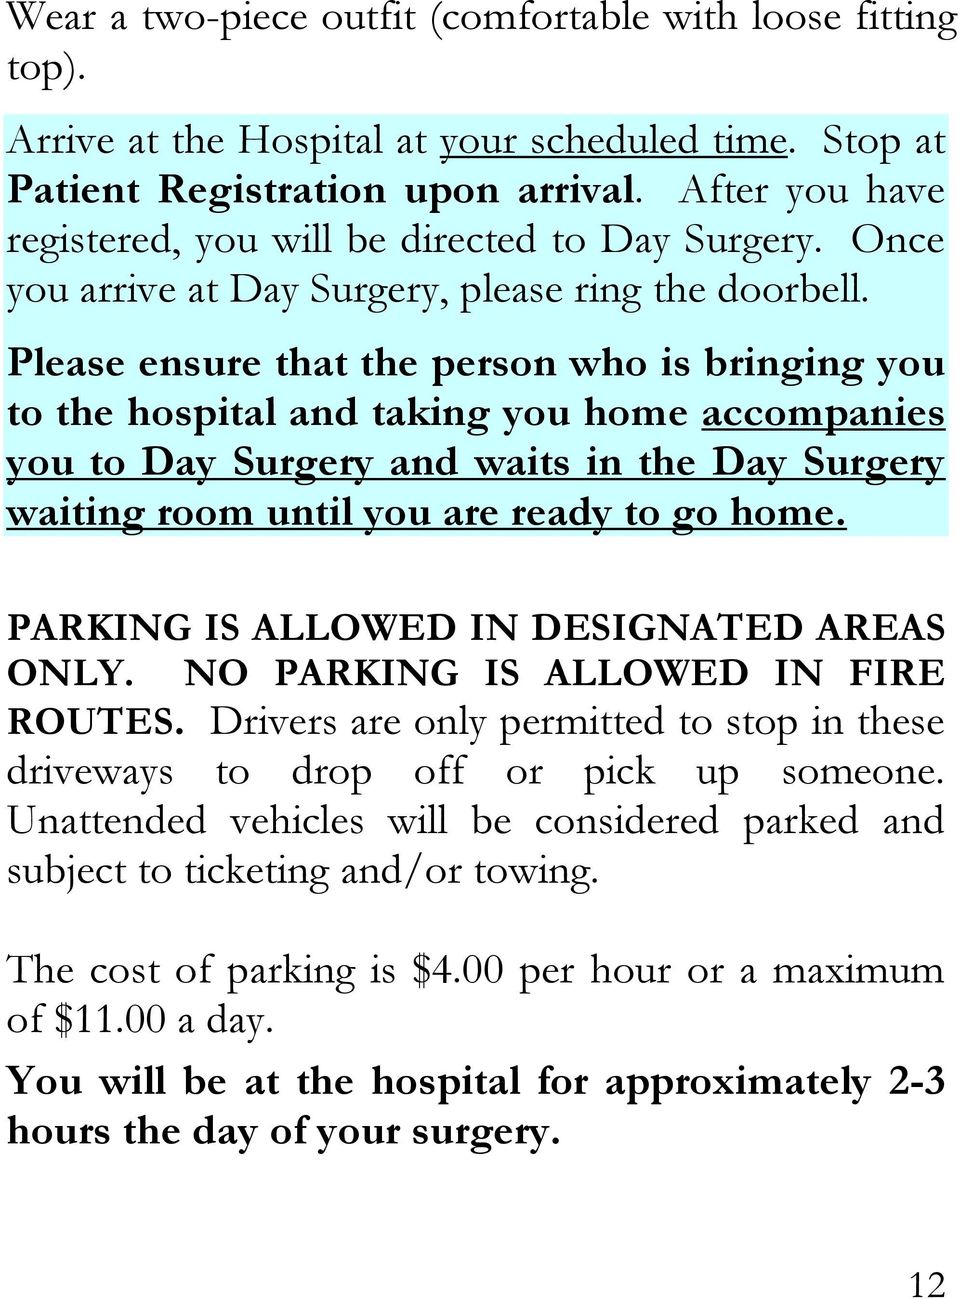 Please ensure that the person who is bringing you to the hospital and taking you home accompanies you to Day Surgery and waits in the Day Surgery waiting room until you are ready to go home.